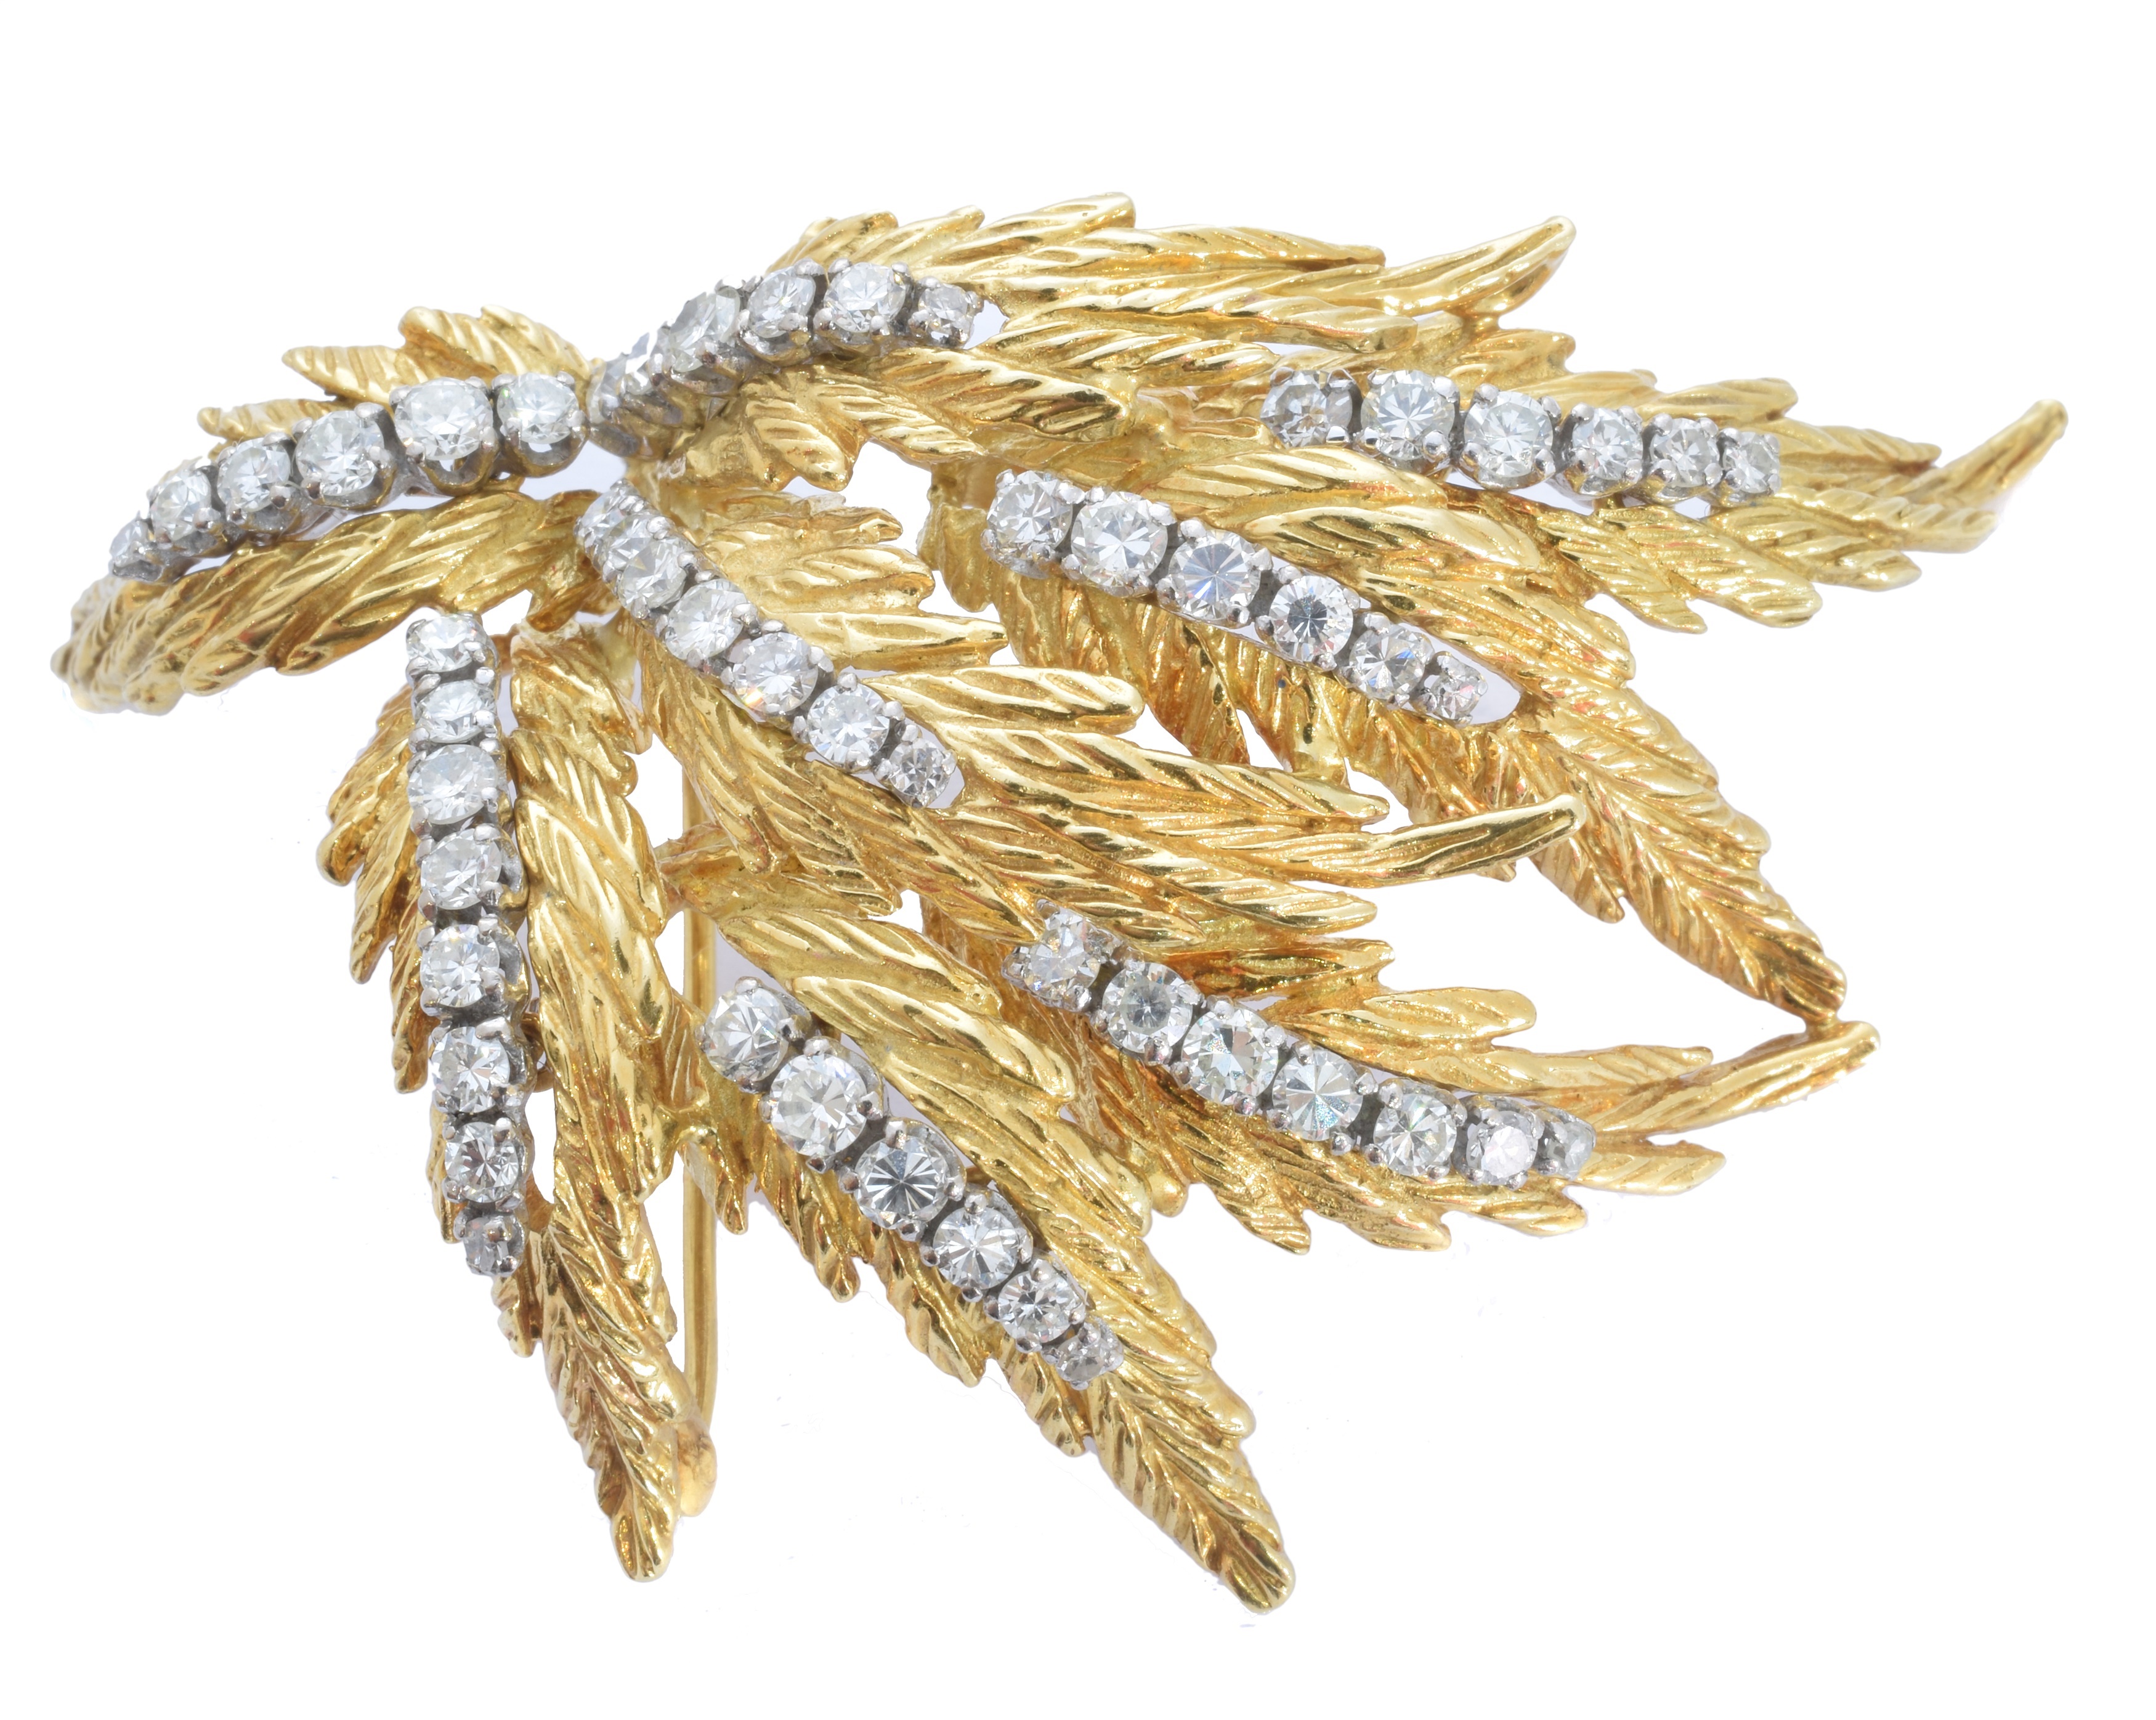 A 1960s 18ct diamond spray brooch by Ben Rosenfeld, designed as a textured foliate spray with single and brilliant cut diamond accents, maker's marks for Ben Rosenfeld, BRLd, hallmarks for London, 1968, estimated total diamond weight 2.30cts, length 6.4cm, gross weight 30.9g.